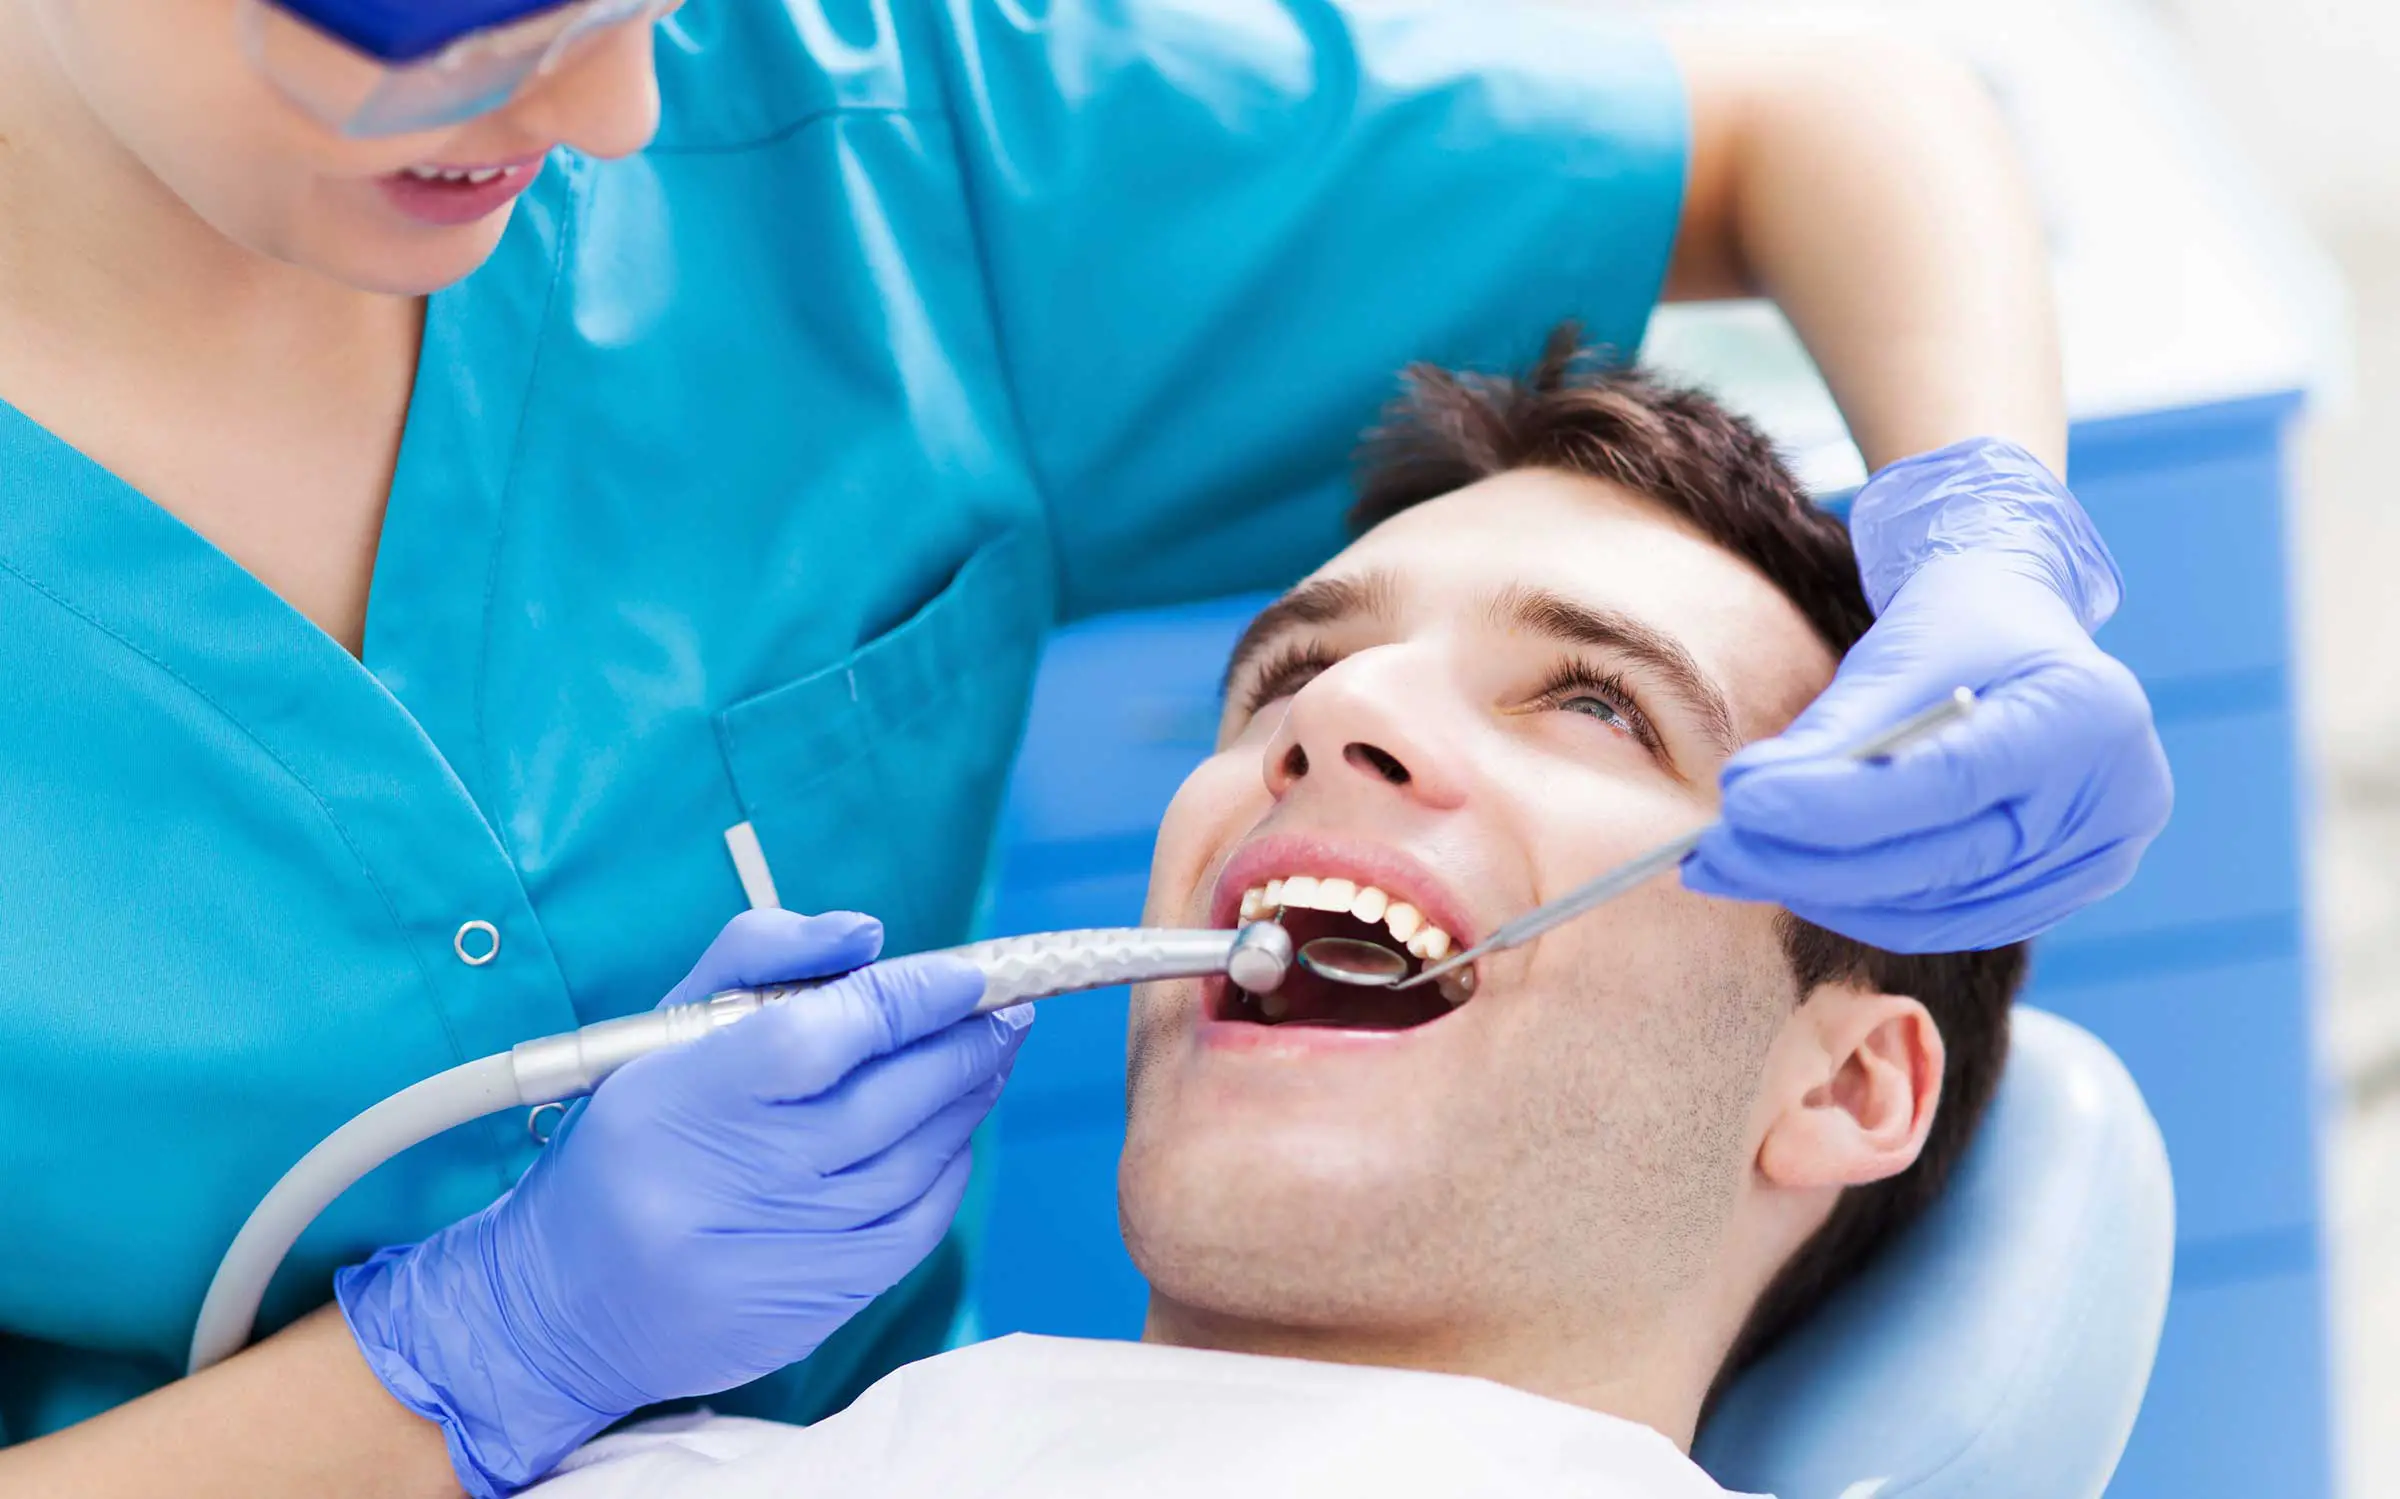 Dental Care Tips: Simple Ways To Care For Your Teeth